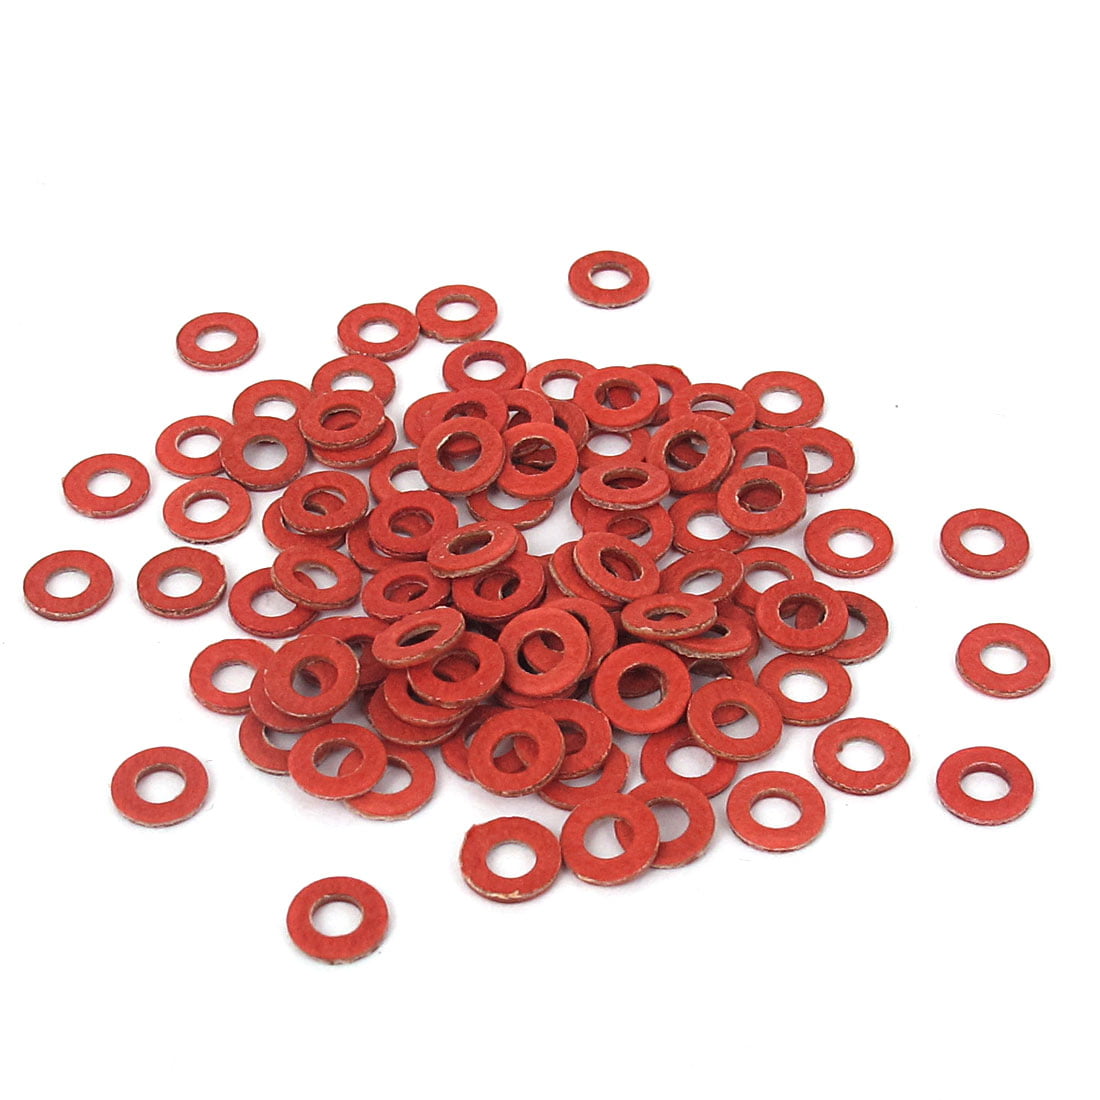 3mmx6mmx1mm Fiber Motherboard Insulating Pad Fastening Washers Red 100pcs 712662772057